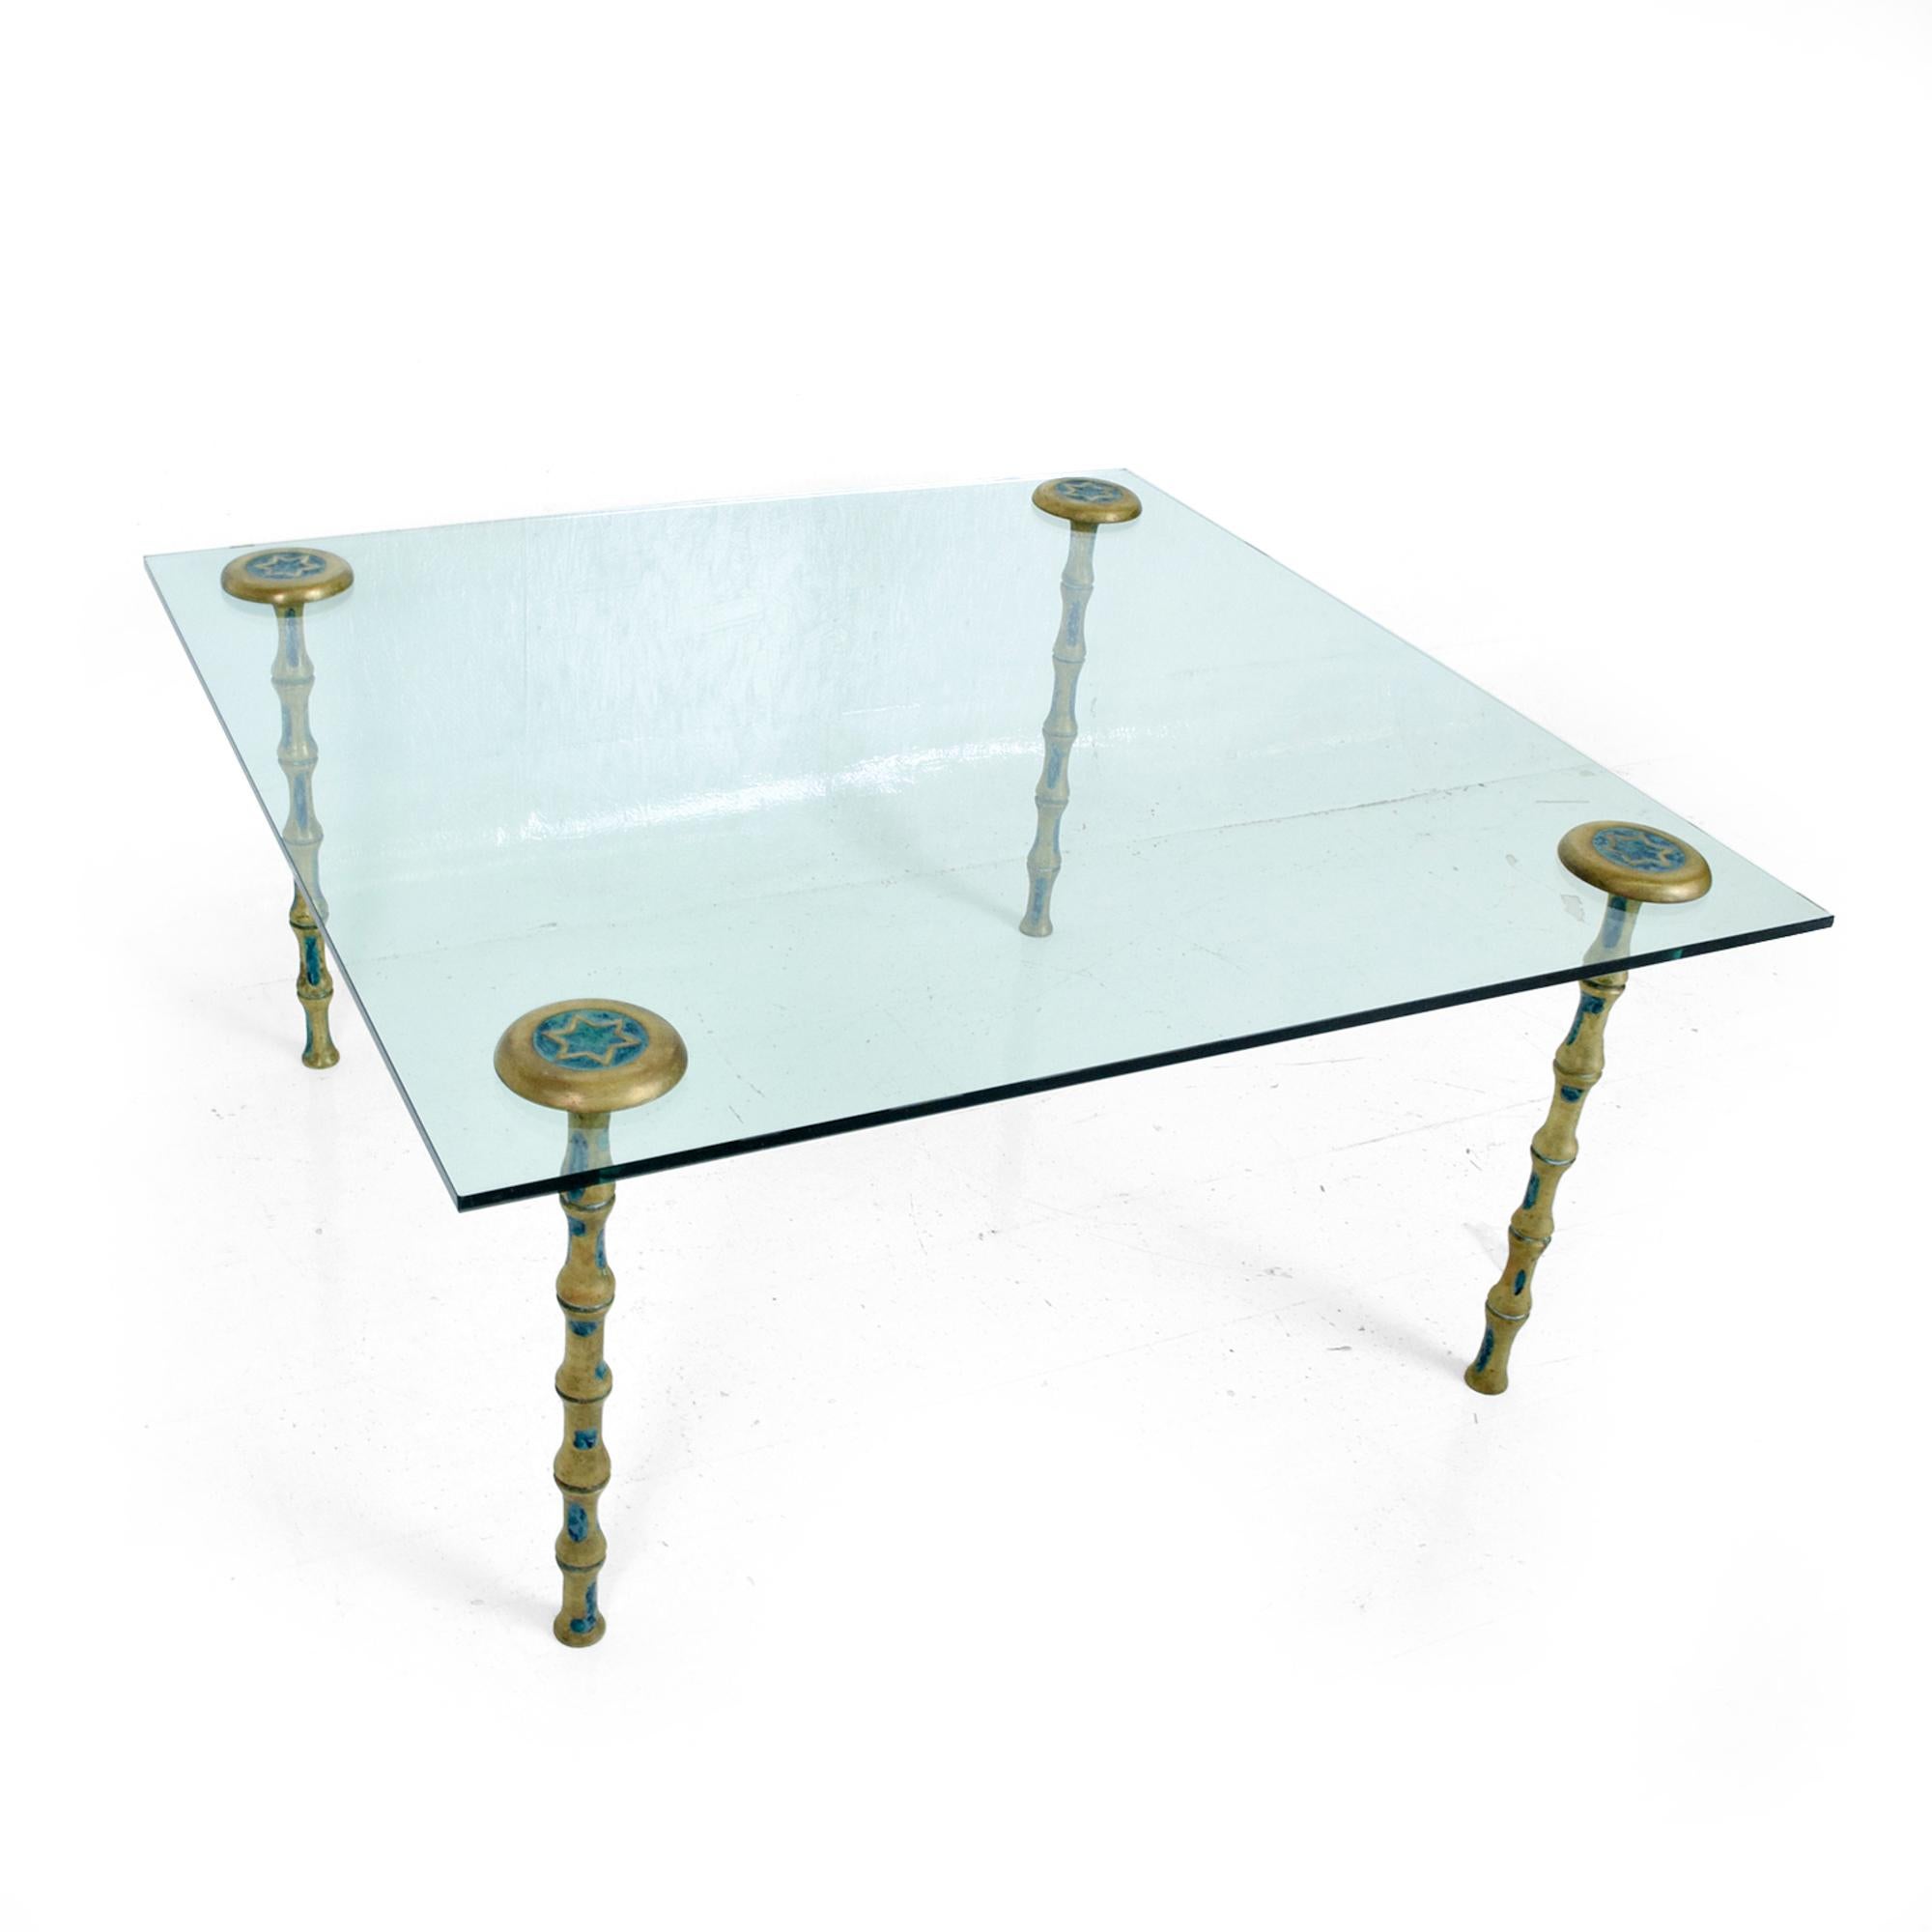 Fabulous fancy set for four legs designed for a coffee table crafted in braided brass & malachite. Mexican Modern 1950s
Stamped: 